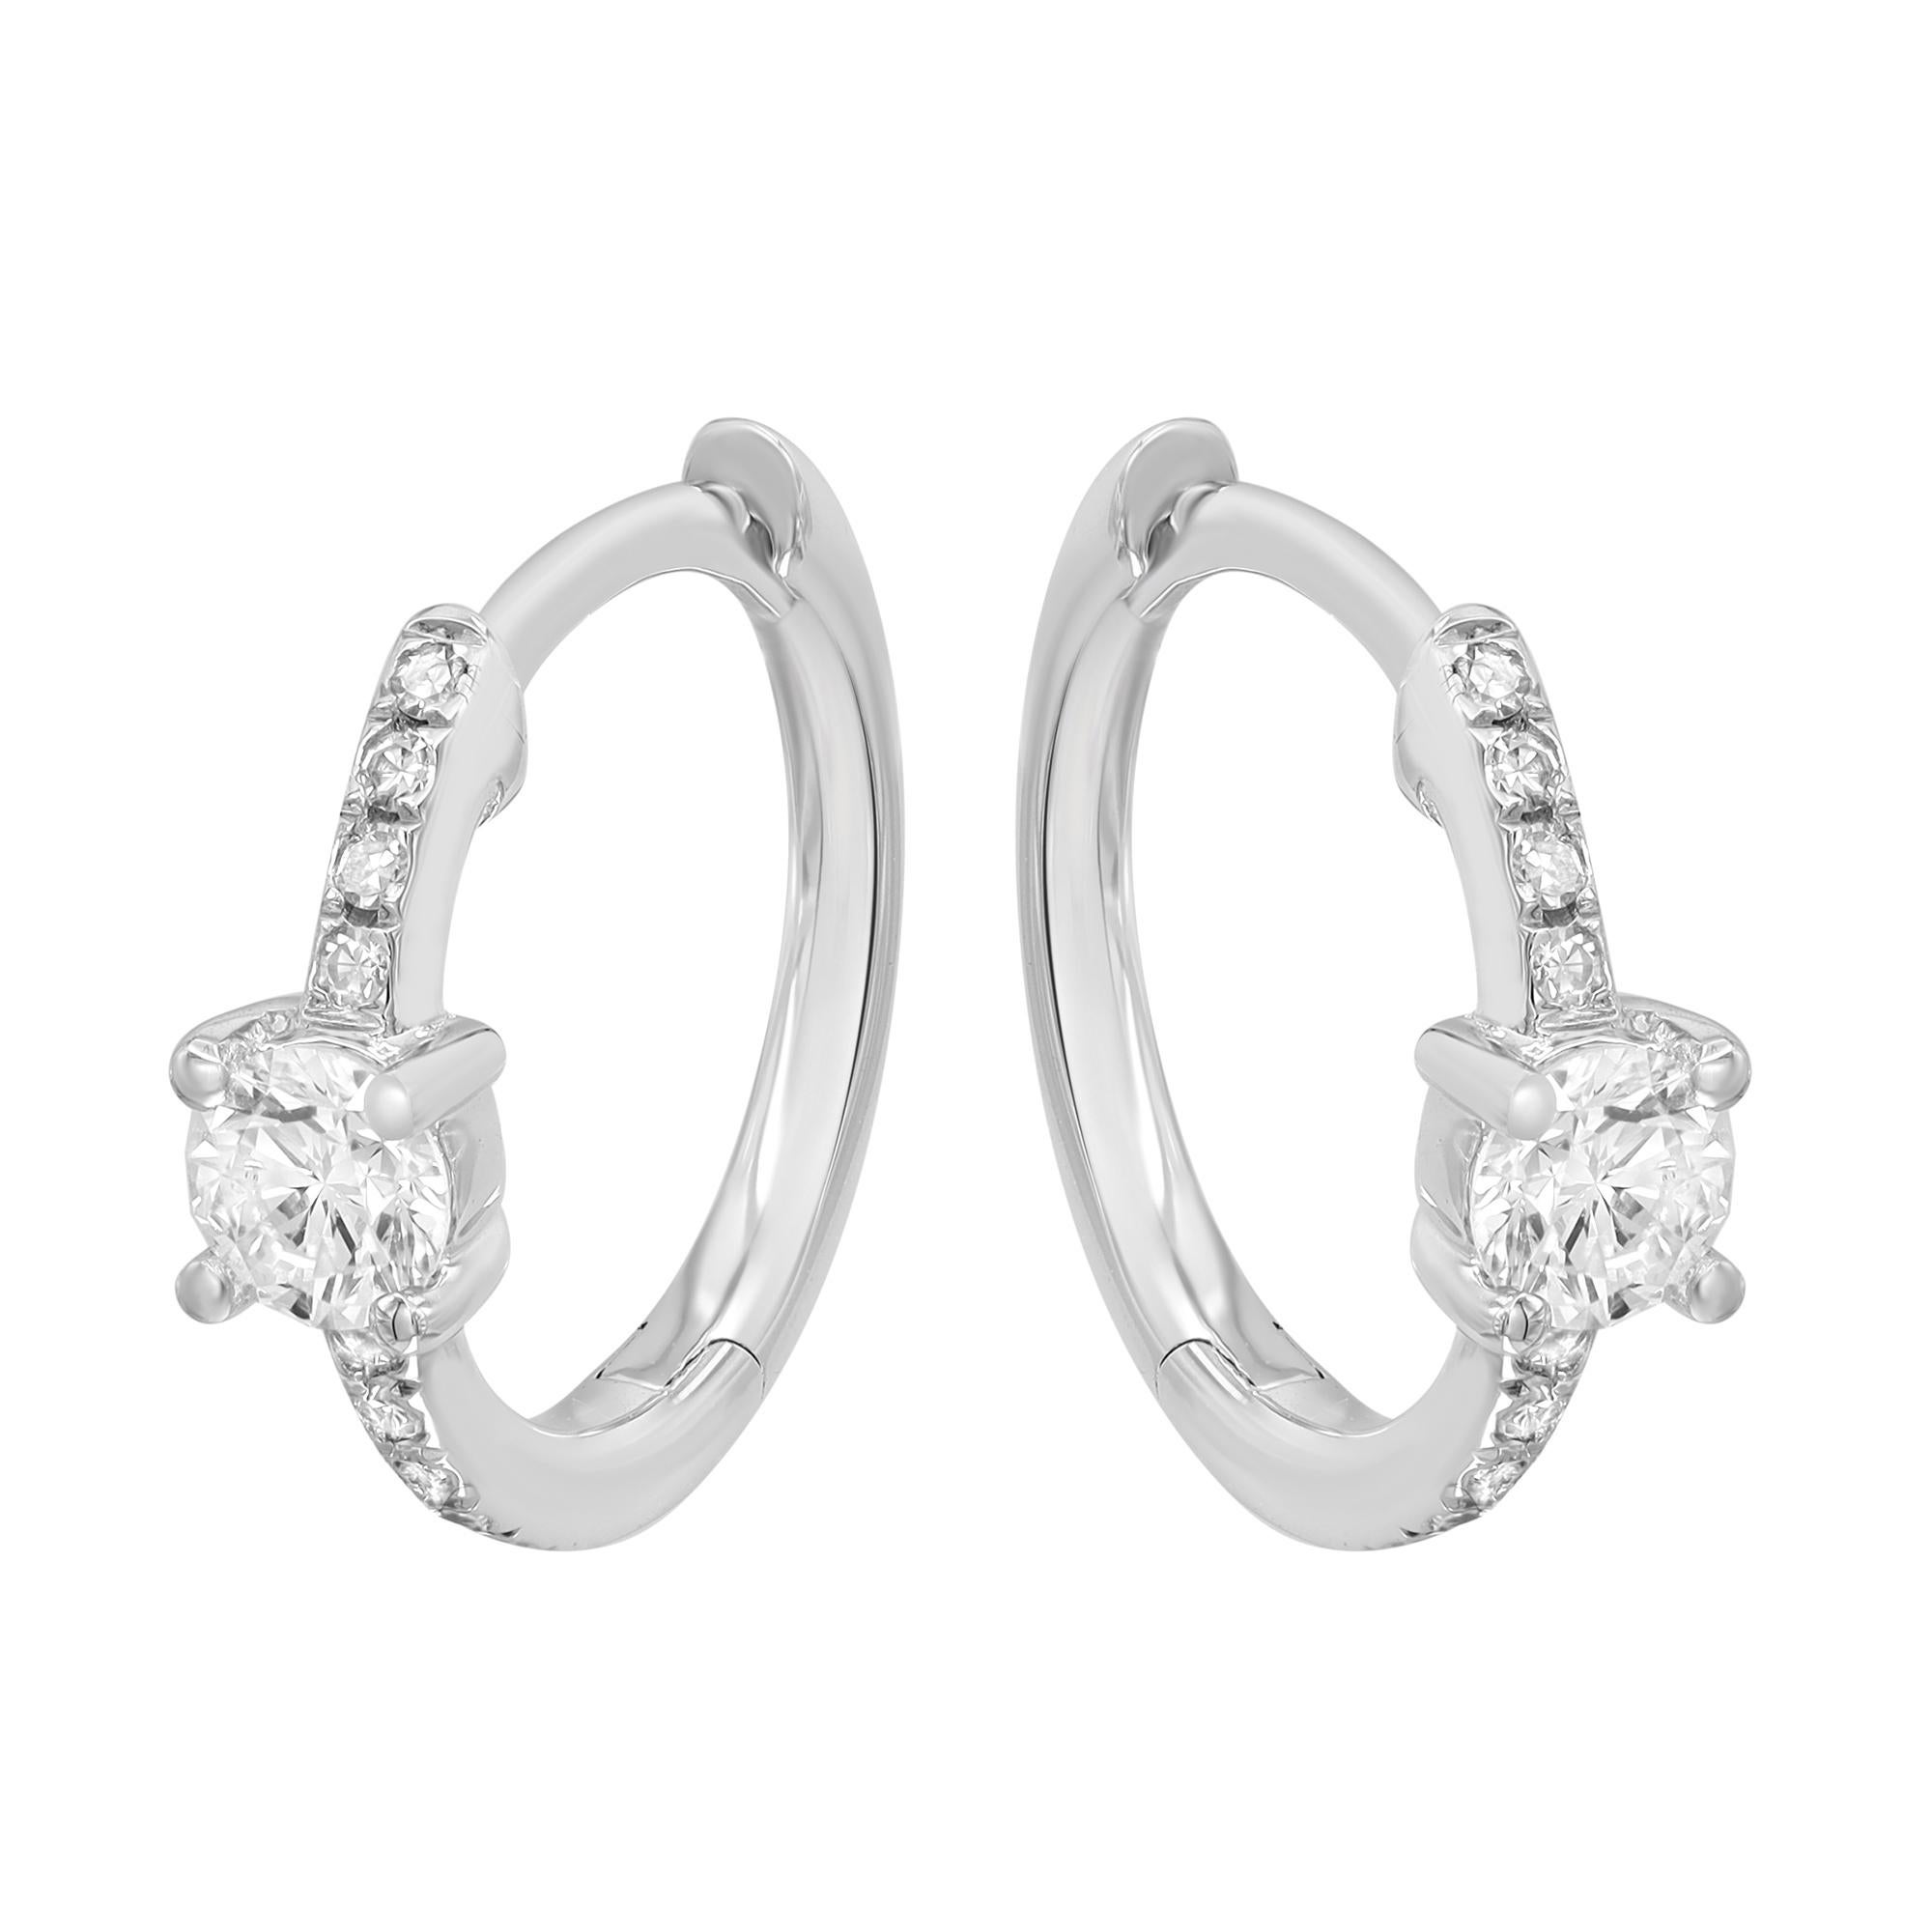 Dainty and dazzling diamond round Huggie earrings, perfect for a great everyday look. These earrings are crafted in fine high polished 14K white gold and encrusted with bright white round cut diamonds weighing 0.25 carat. Diamond color G-H and